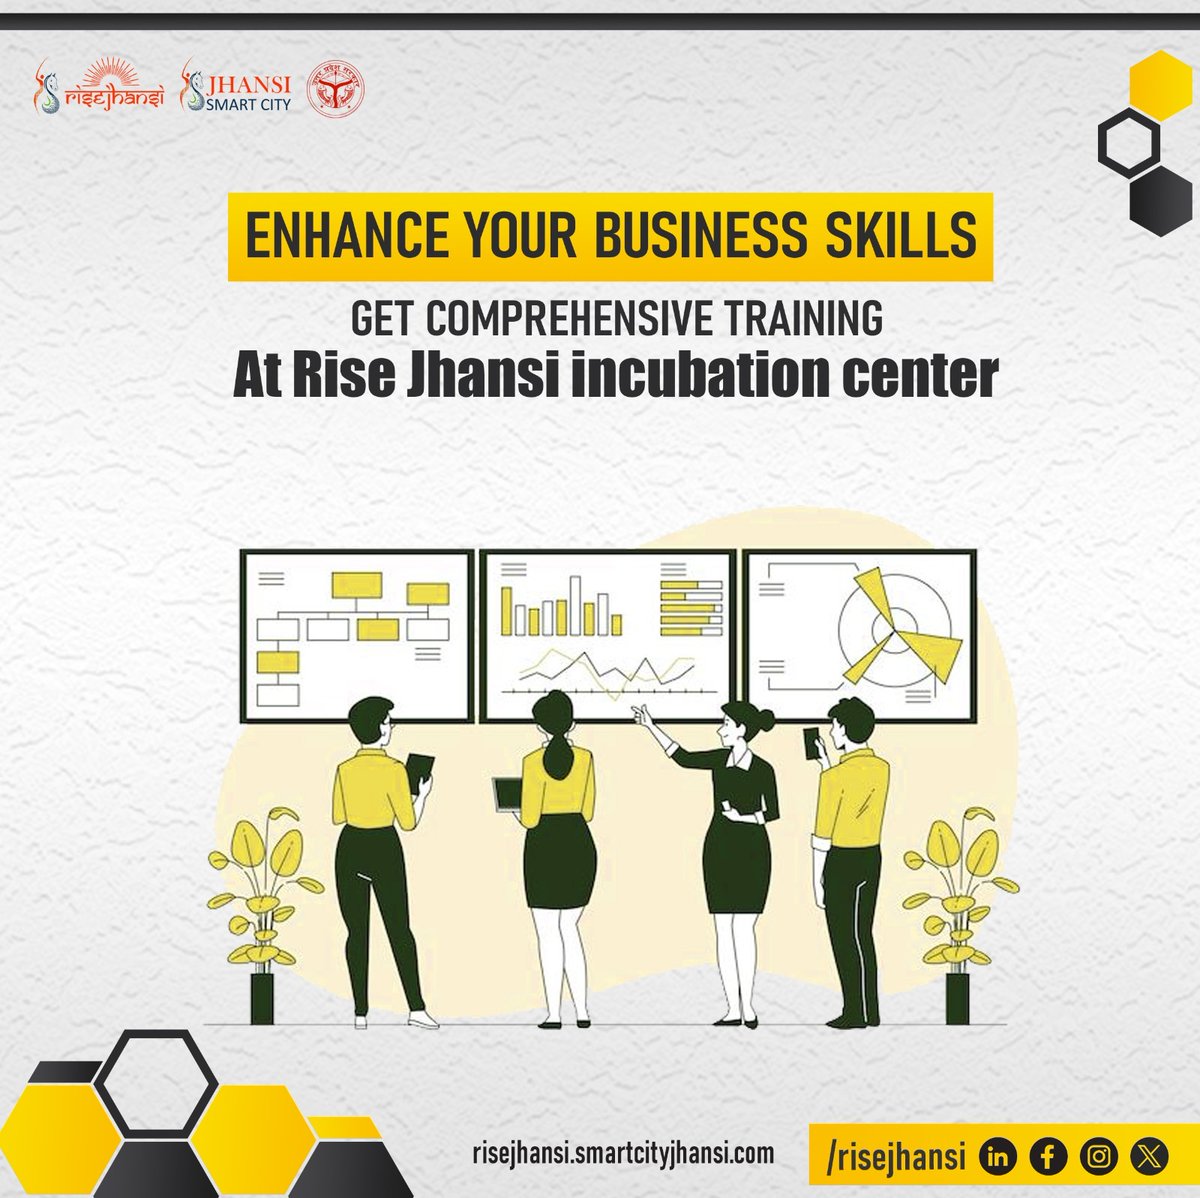 🚀 Ready to launch your business to new heights? Join us at RISE Jhansi Incubation Center! Expert guidance, tailored programs, and networking await. Don't miss out - let's soar together! 

#RISEJhansi #Entrepreneurship #BusinessTraining #RISE #IM #IncubationMasters